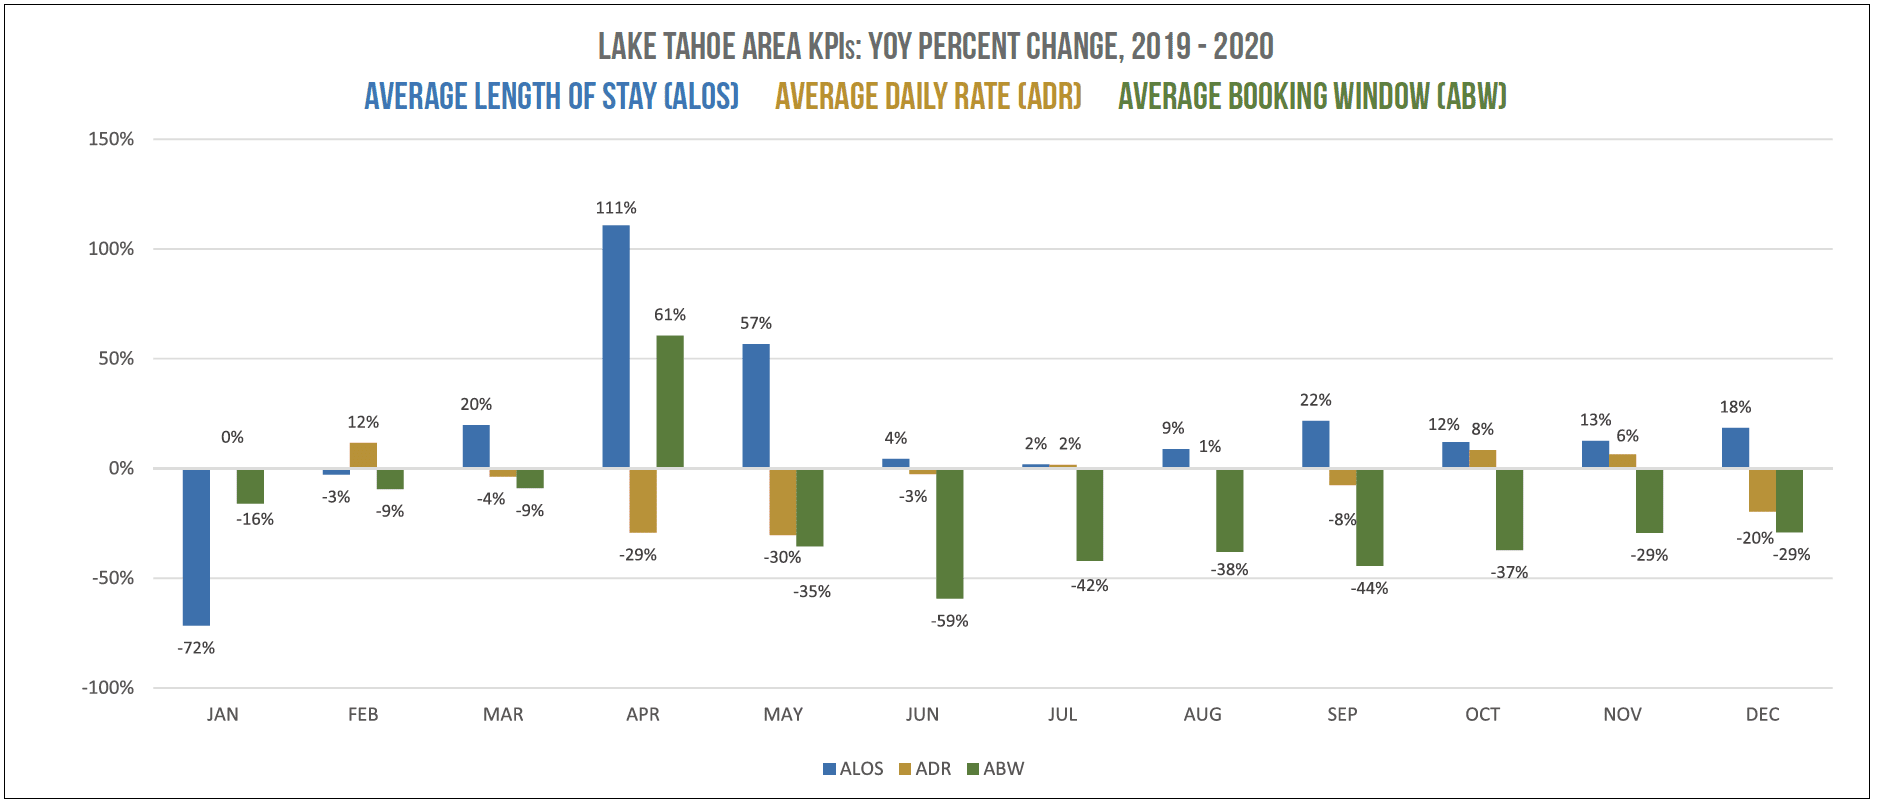 Year-Round Mountain Markets Pulled Ahead in May Lake Tahoe Area and TN Mountains 2020 vs 2019 Lake Tahoe Yoy Chng